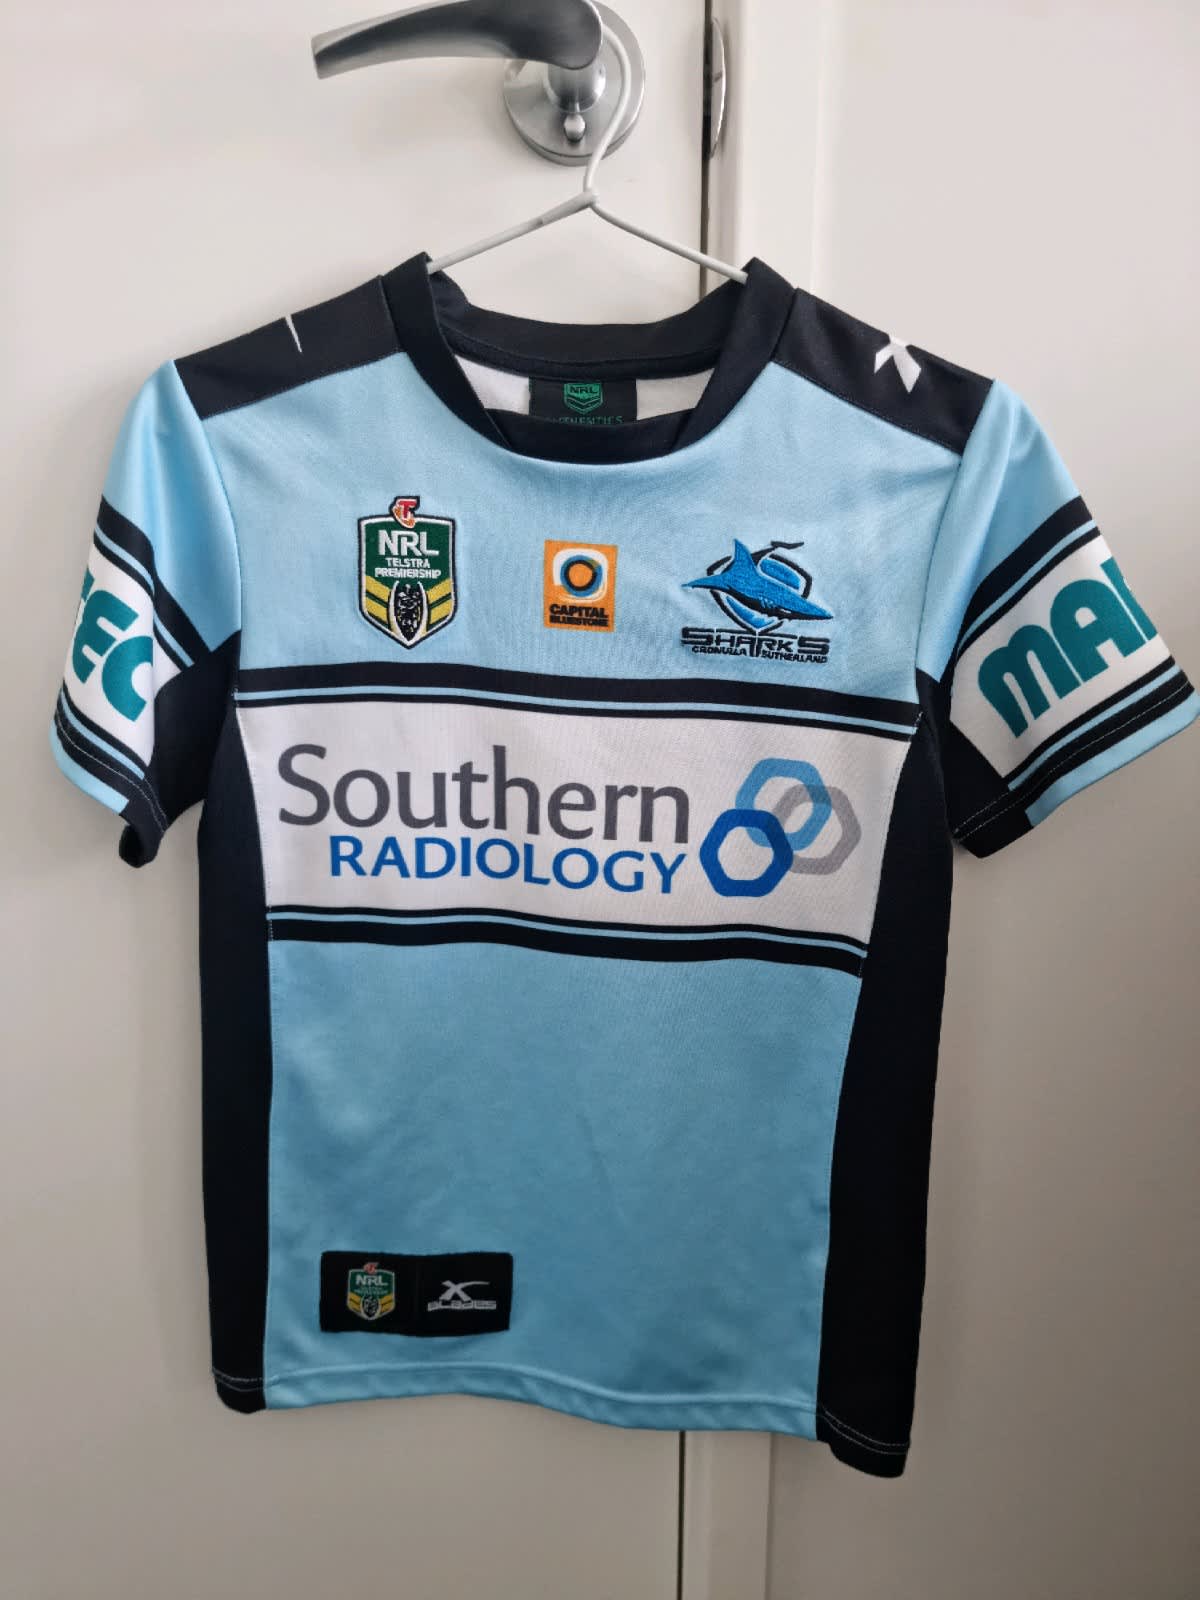 Sharks Have Heart Jersey Auction